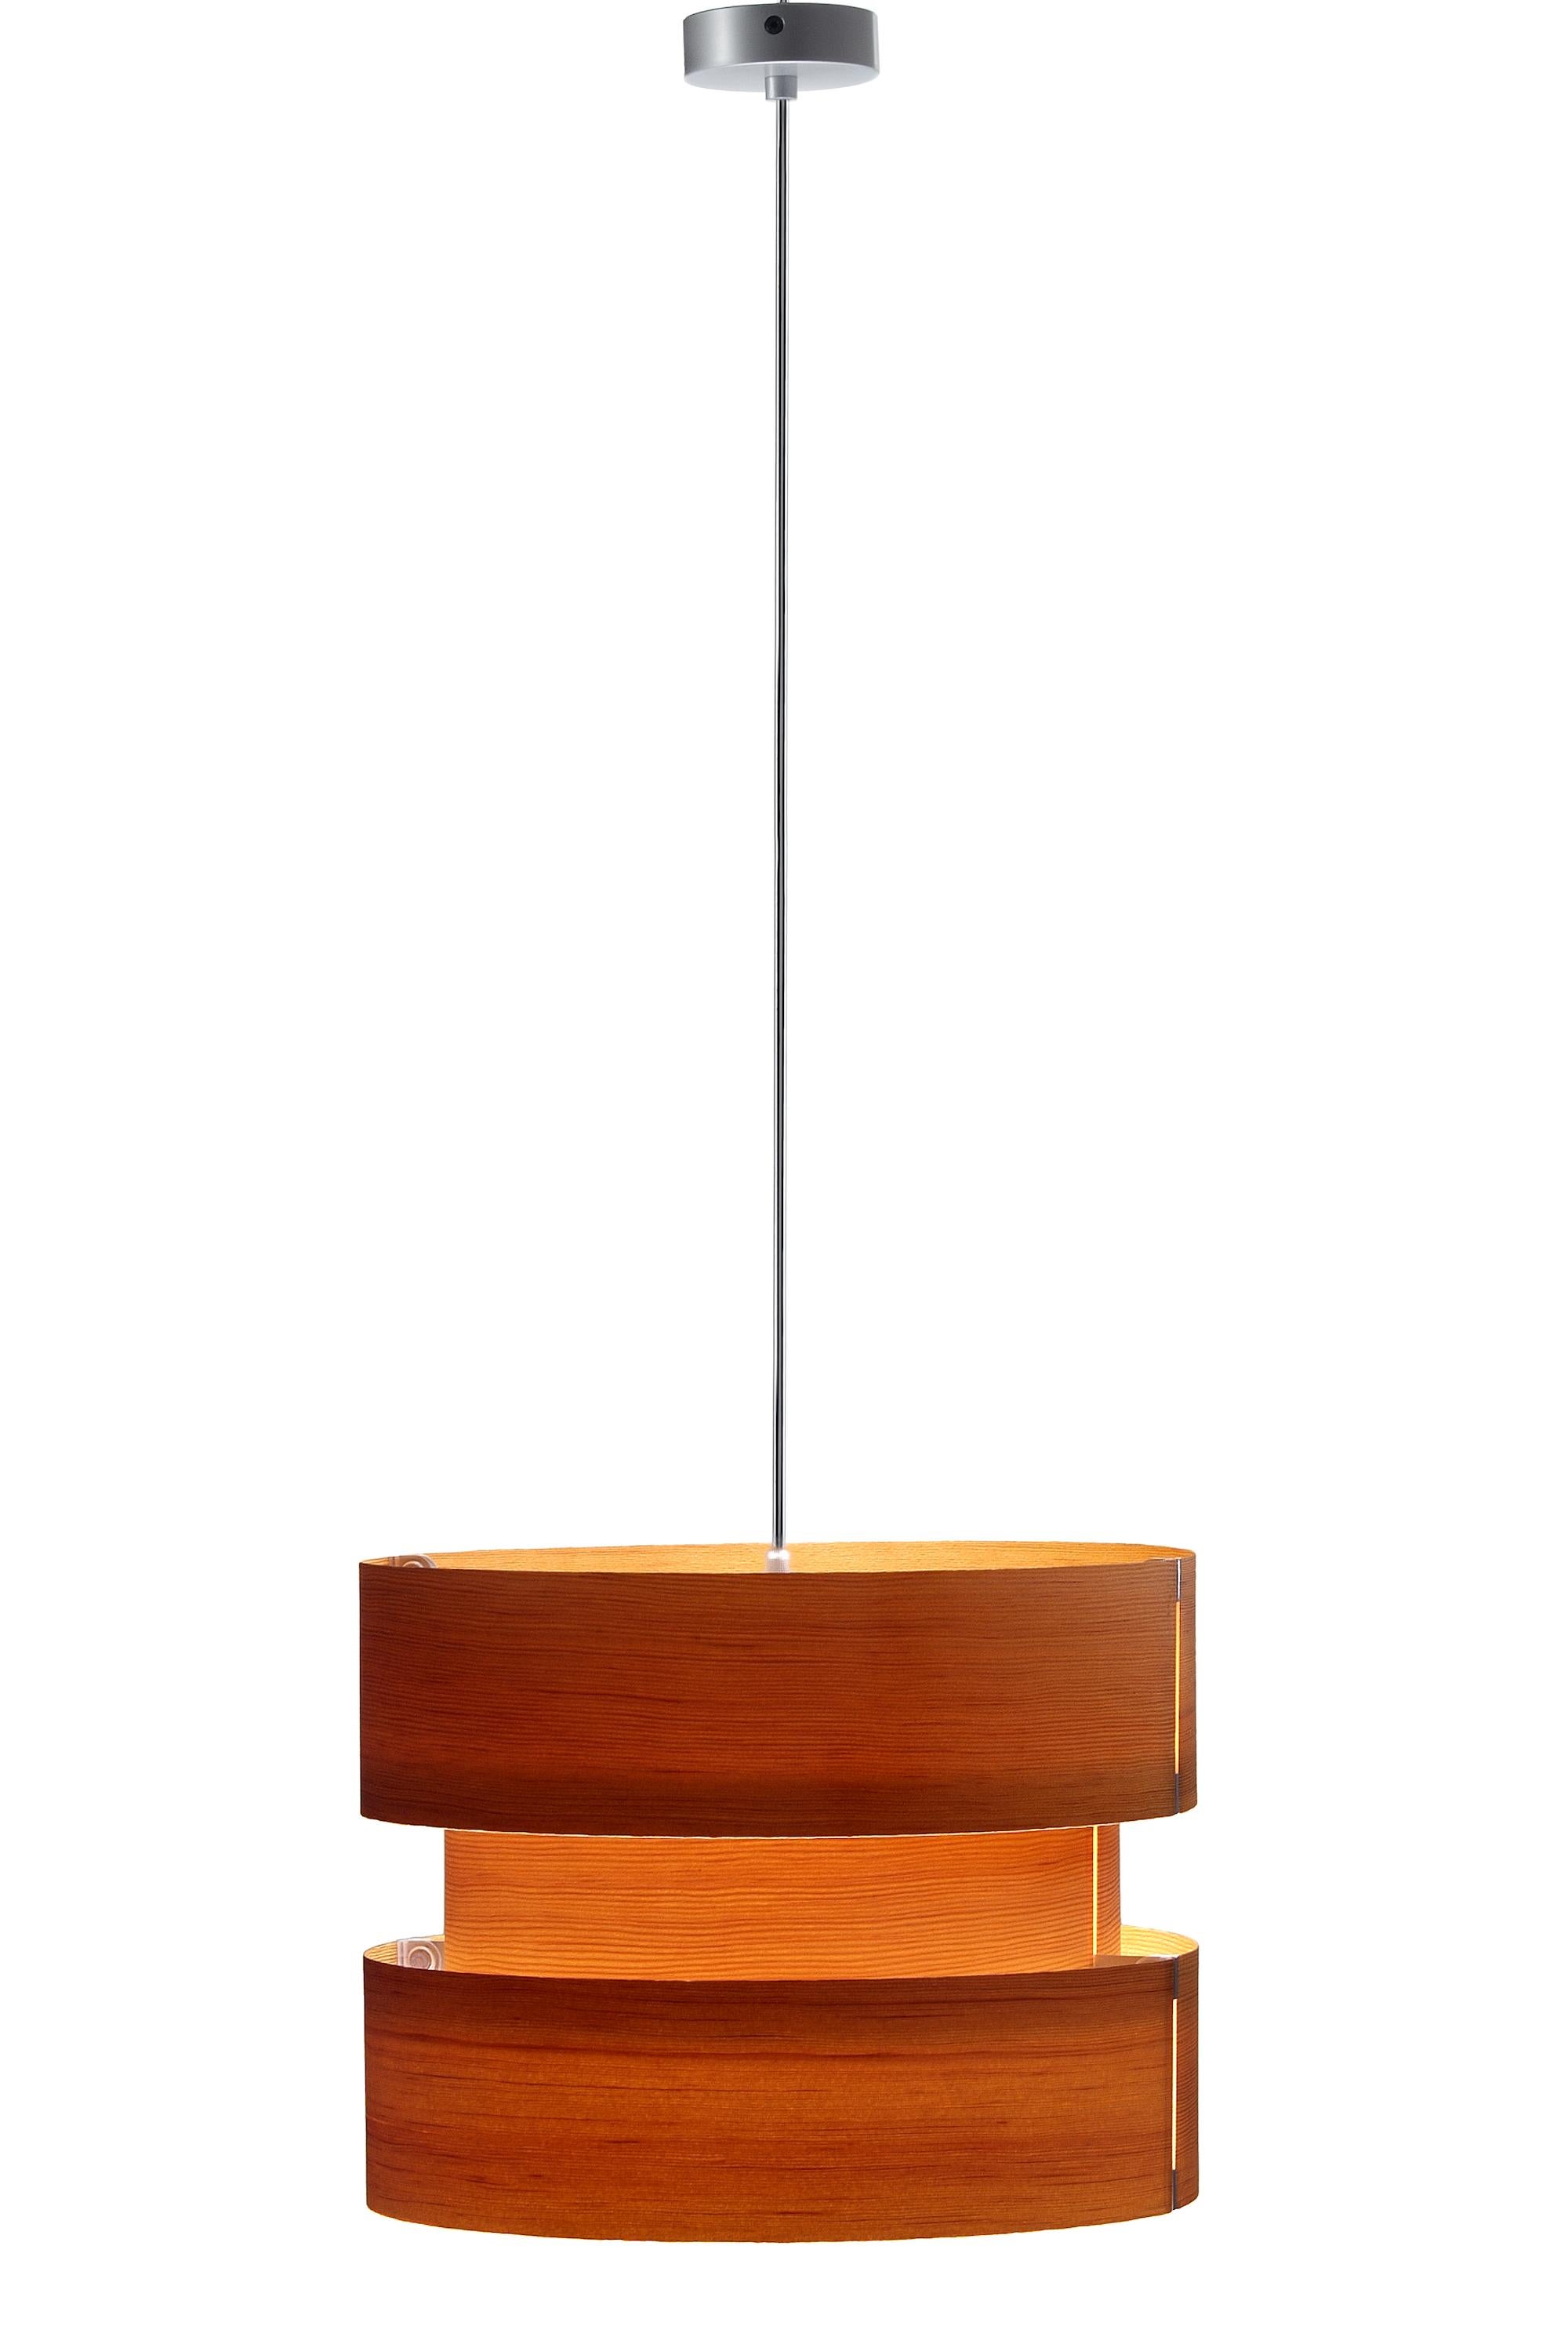 Large J.A. Coderch 'Cister Grande' wood suspension lamp for Tunds. 

Pablo Picasso declared one of J.A. Coderch's bentwood designs to be 